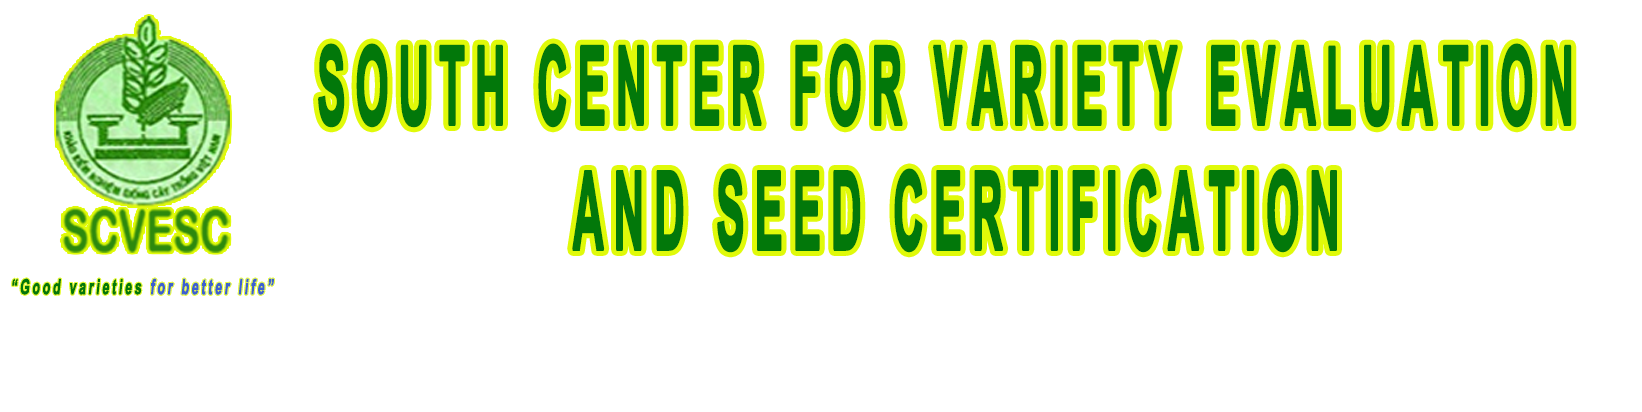 SOUTHERN CENTER FOR PLANT TESTING AND SEED CERTIFICATION